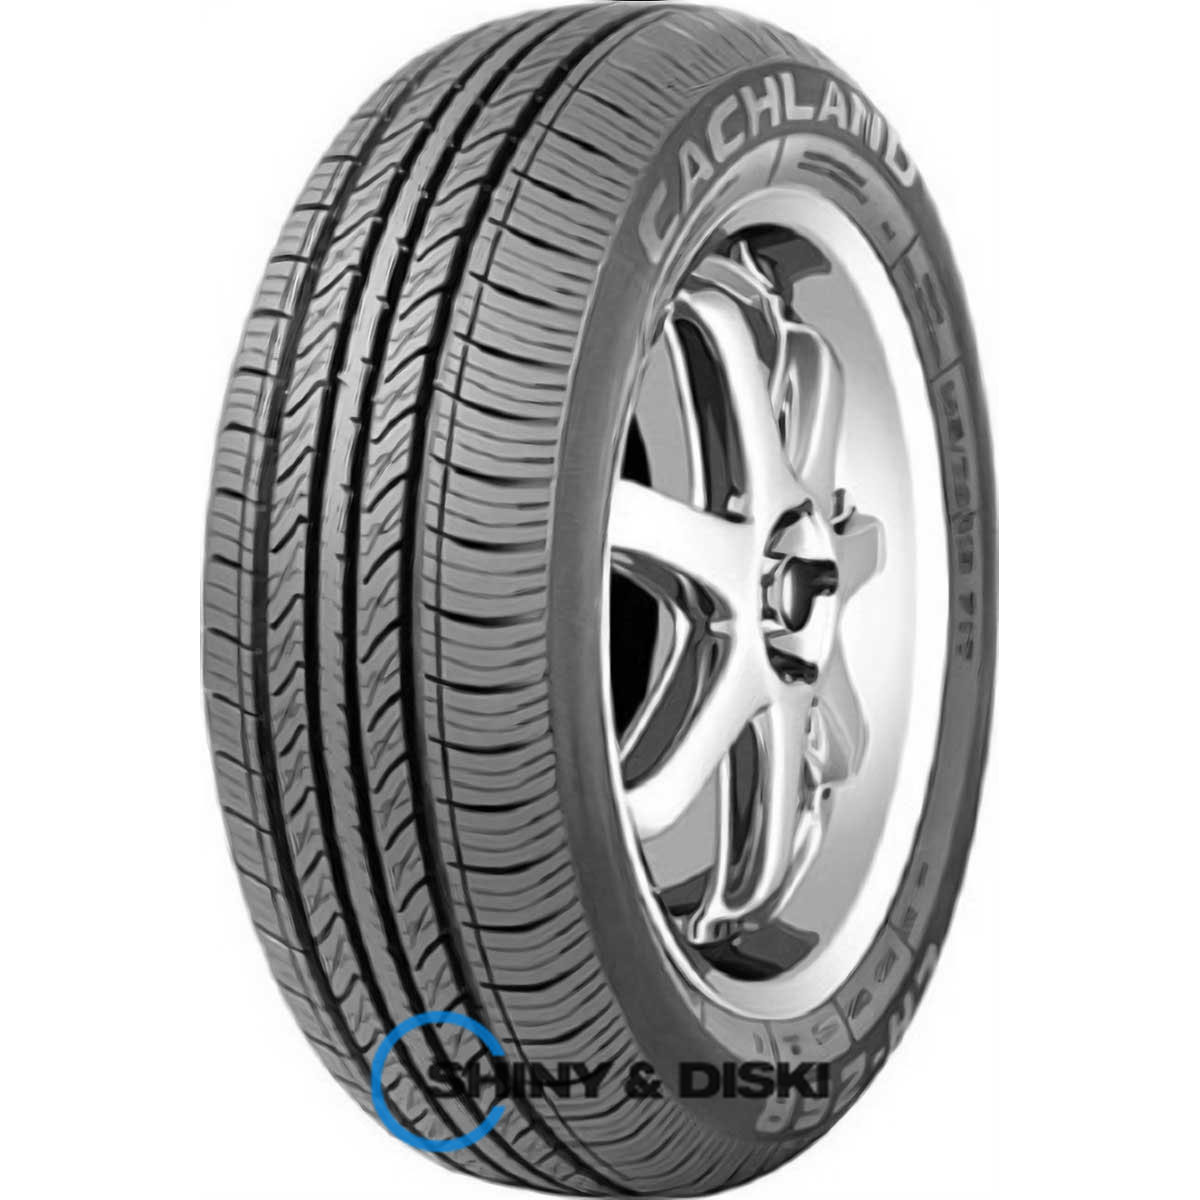 cachland ch-268 165/70 r13 79t